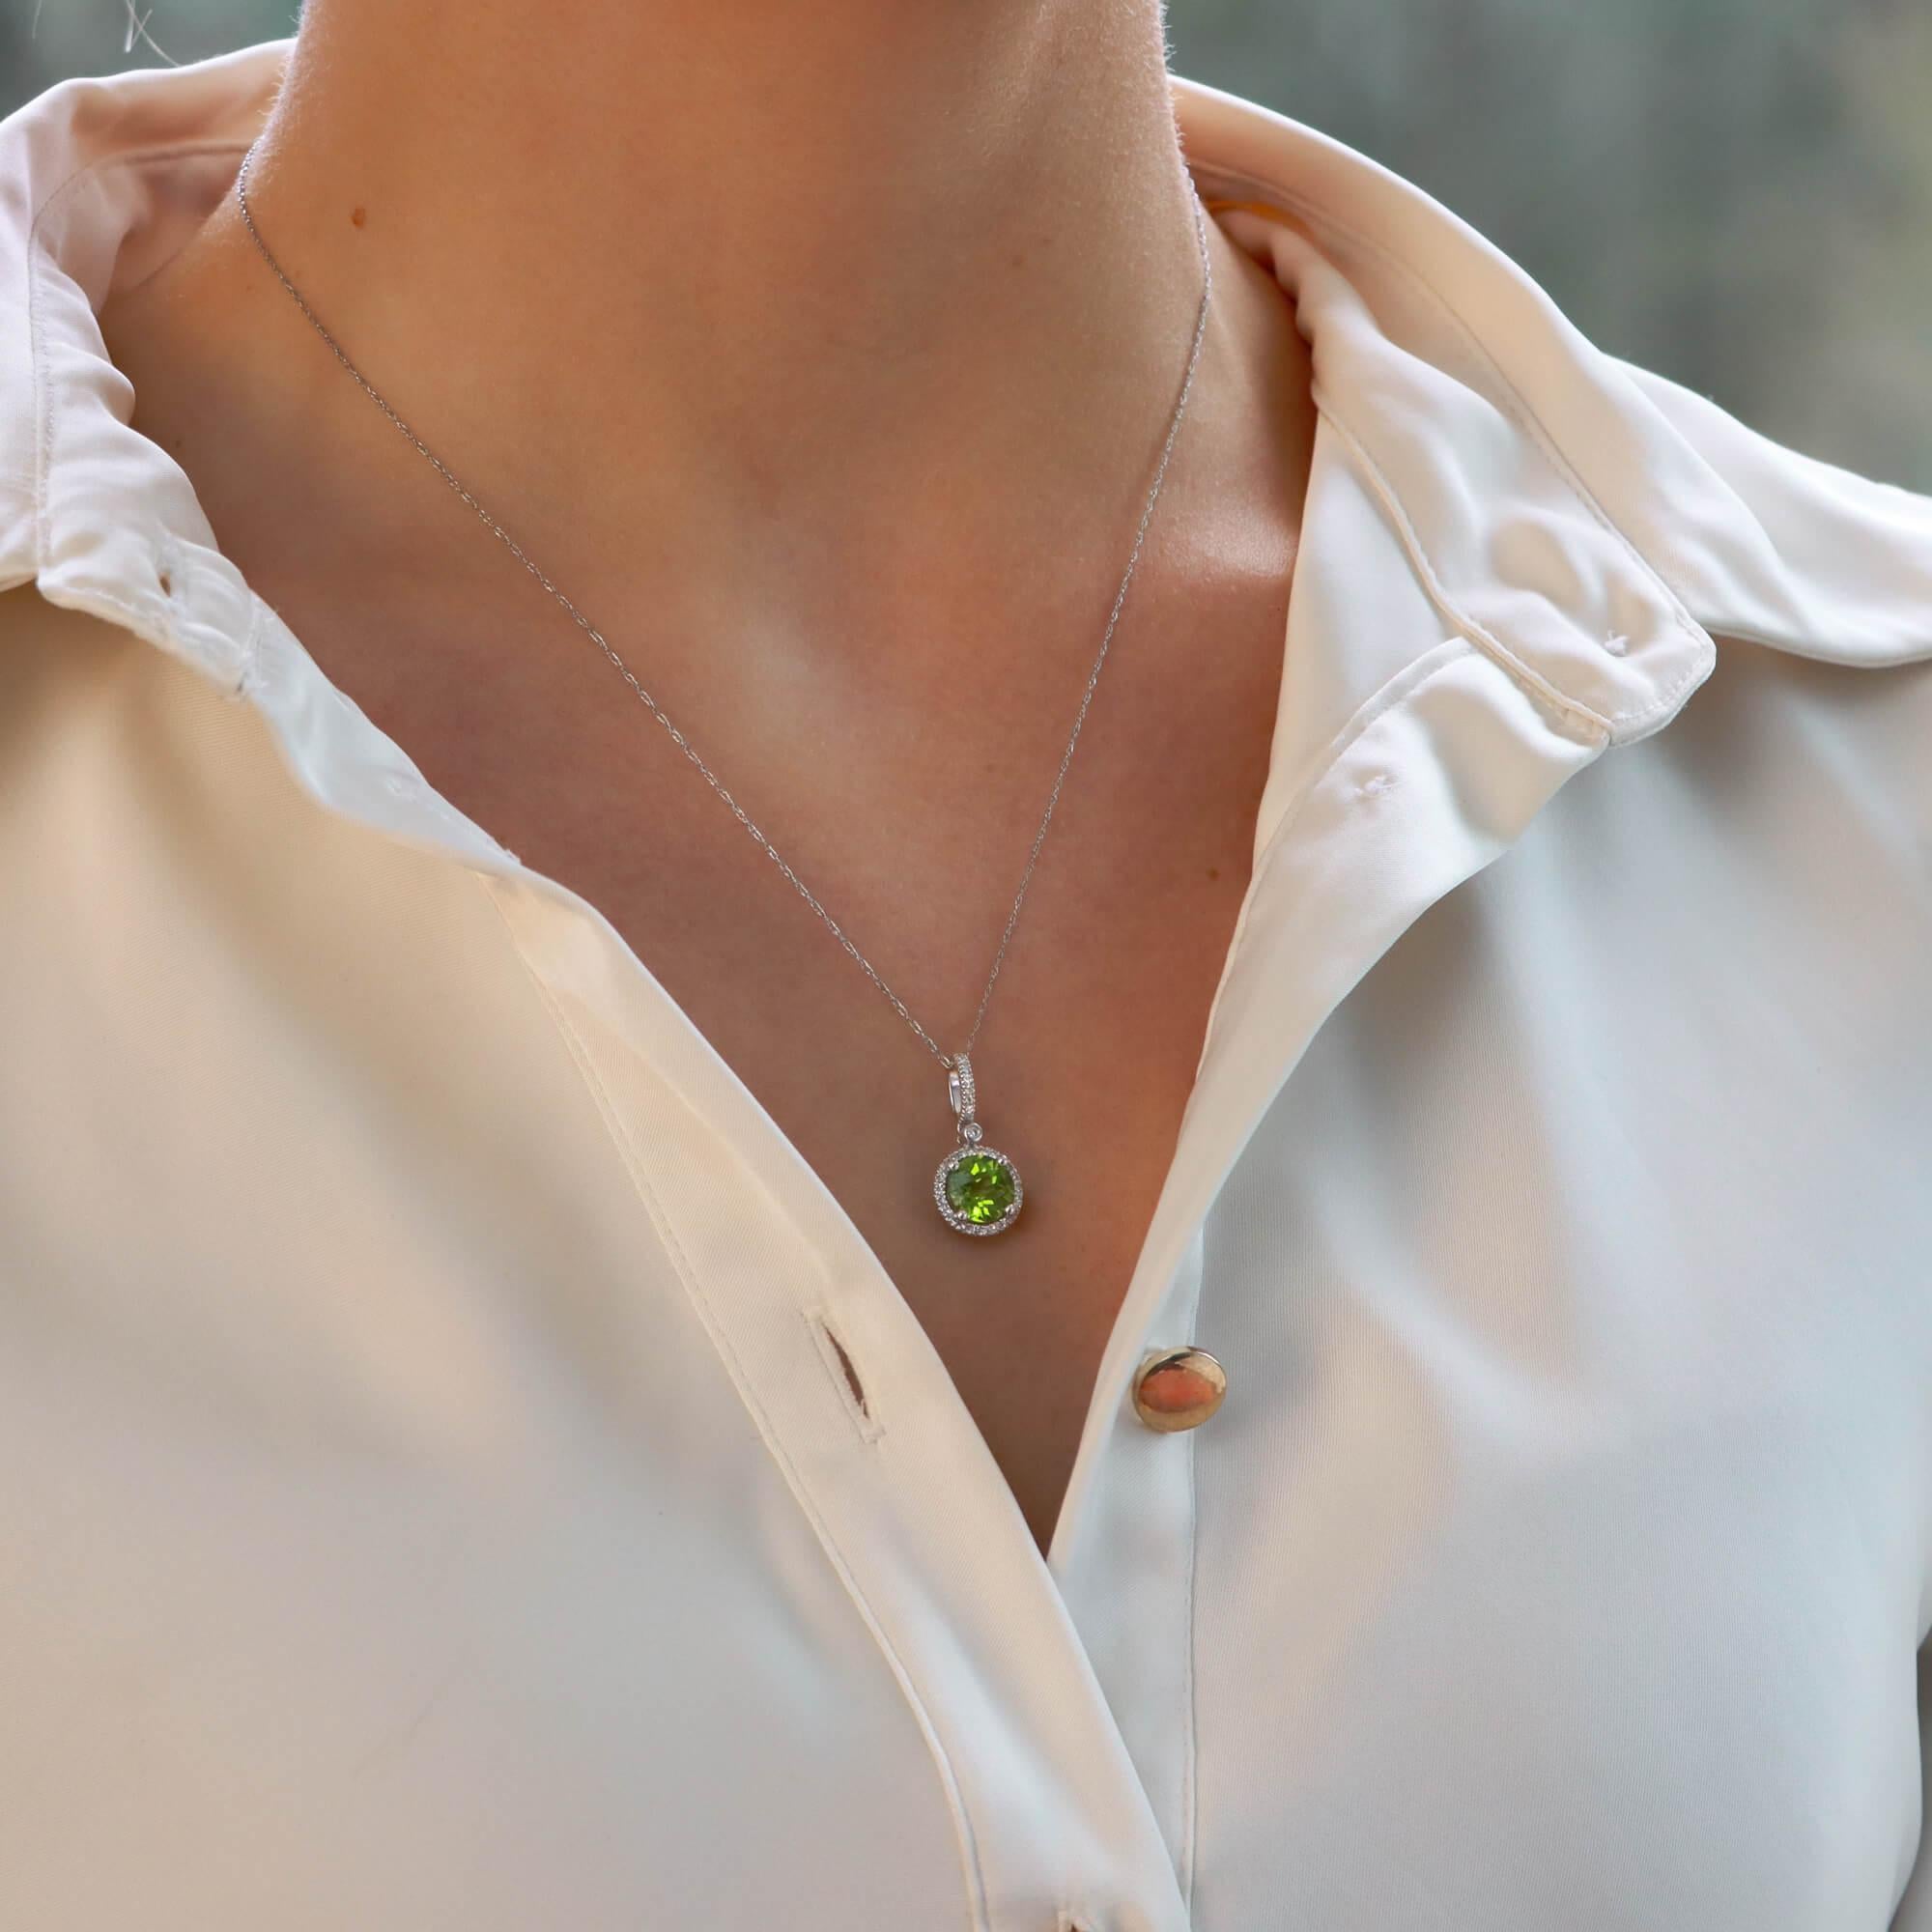 A beautiful contemporary peridot and diamond halo pendant necklace set in 14k white gold.

The pendant is predominantly set with a sparkly round checkerboard cut peridot, which is securely for claw set within a fine diamond set halo. The peridot